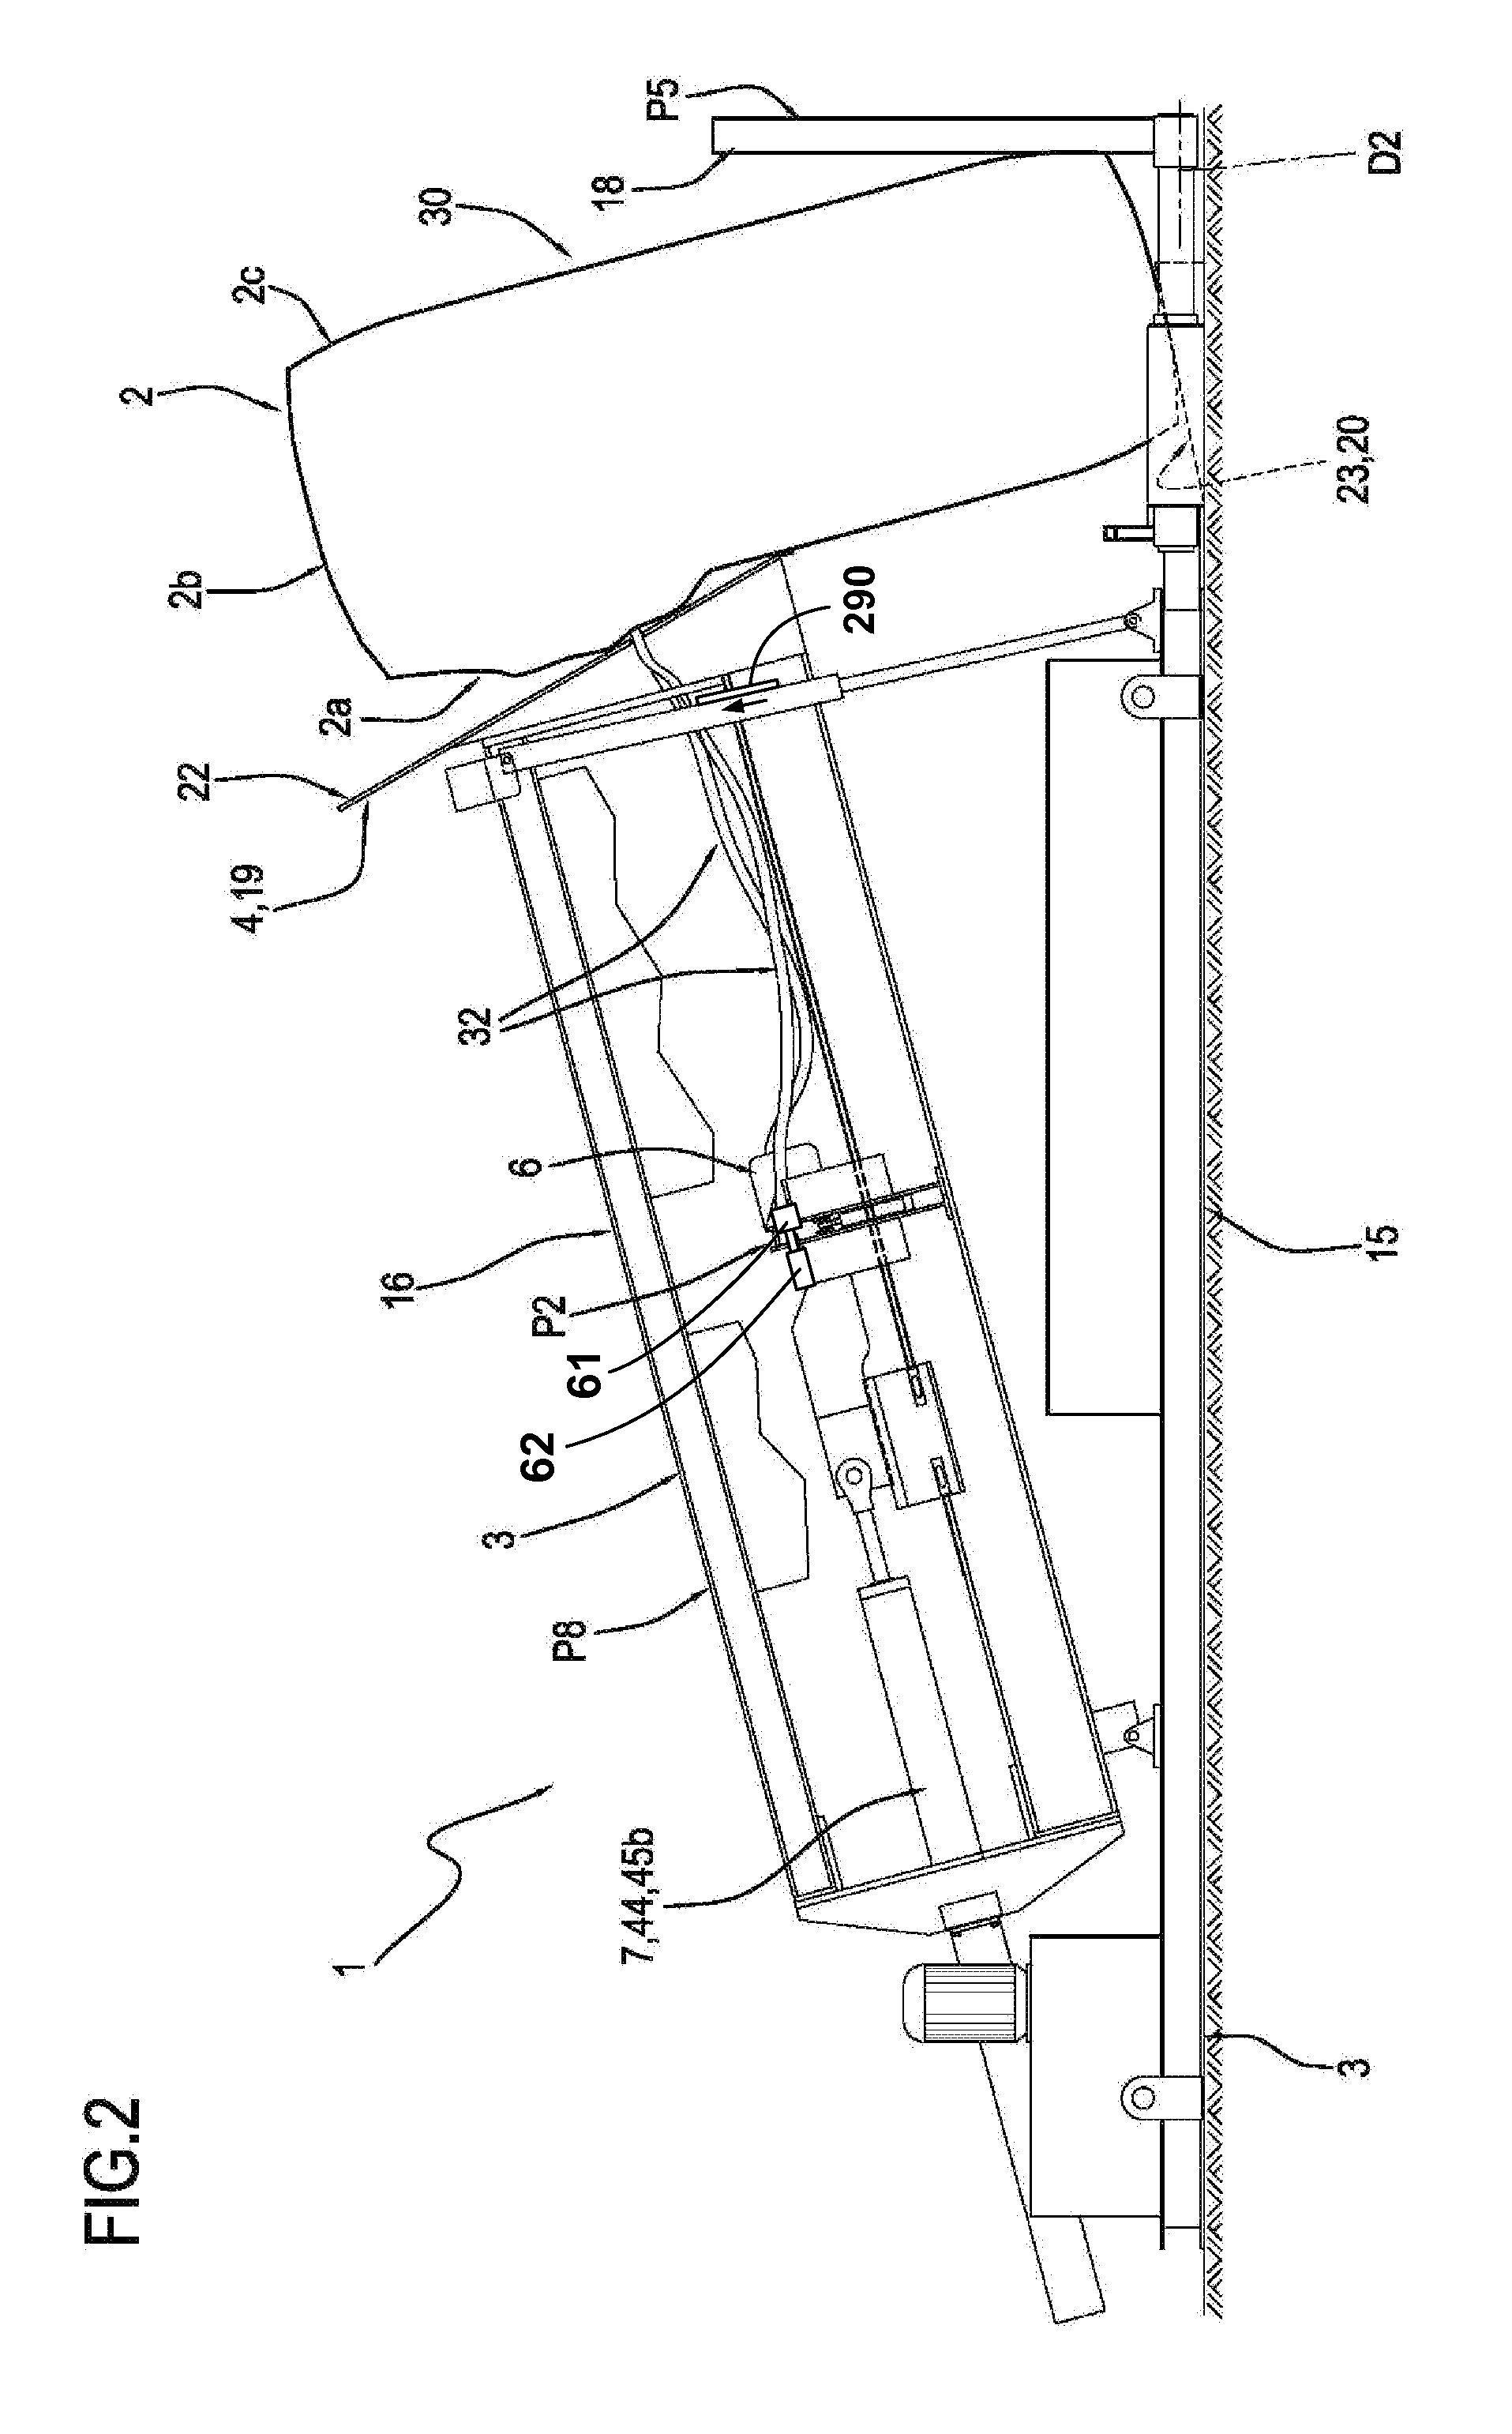 Machine and method for removing beads from tires at the end of life